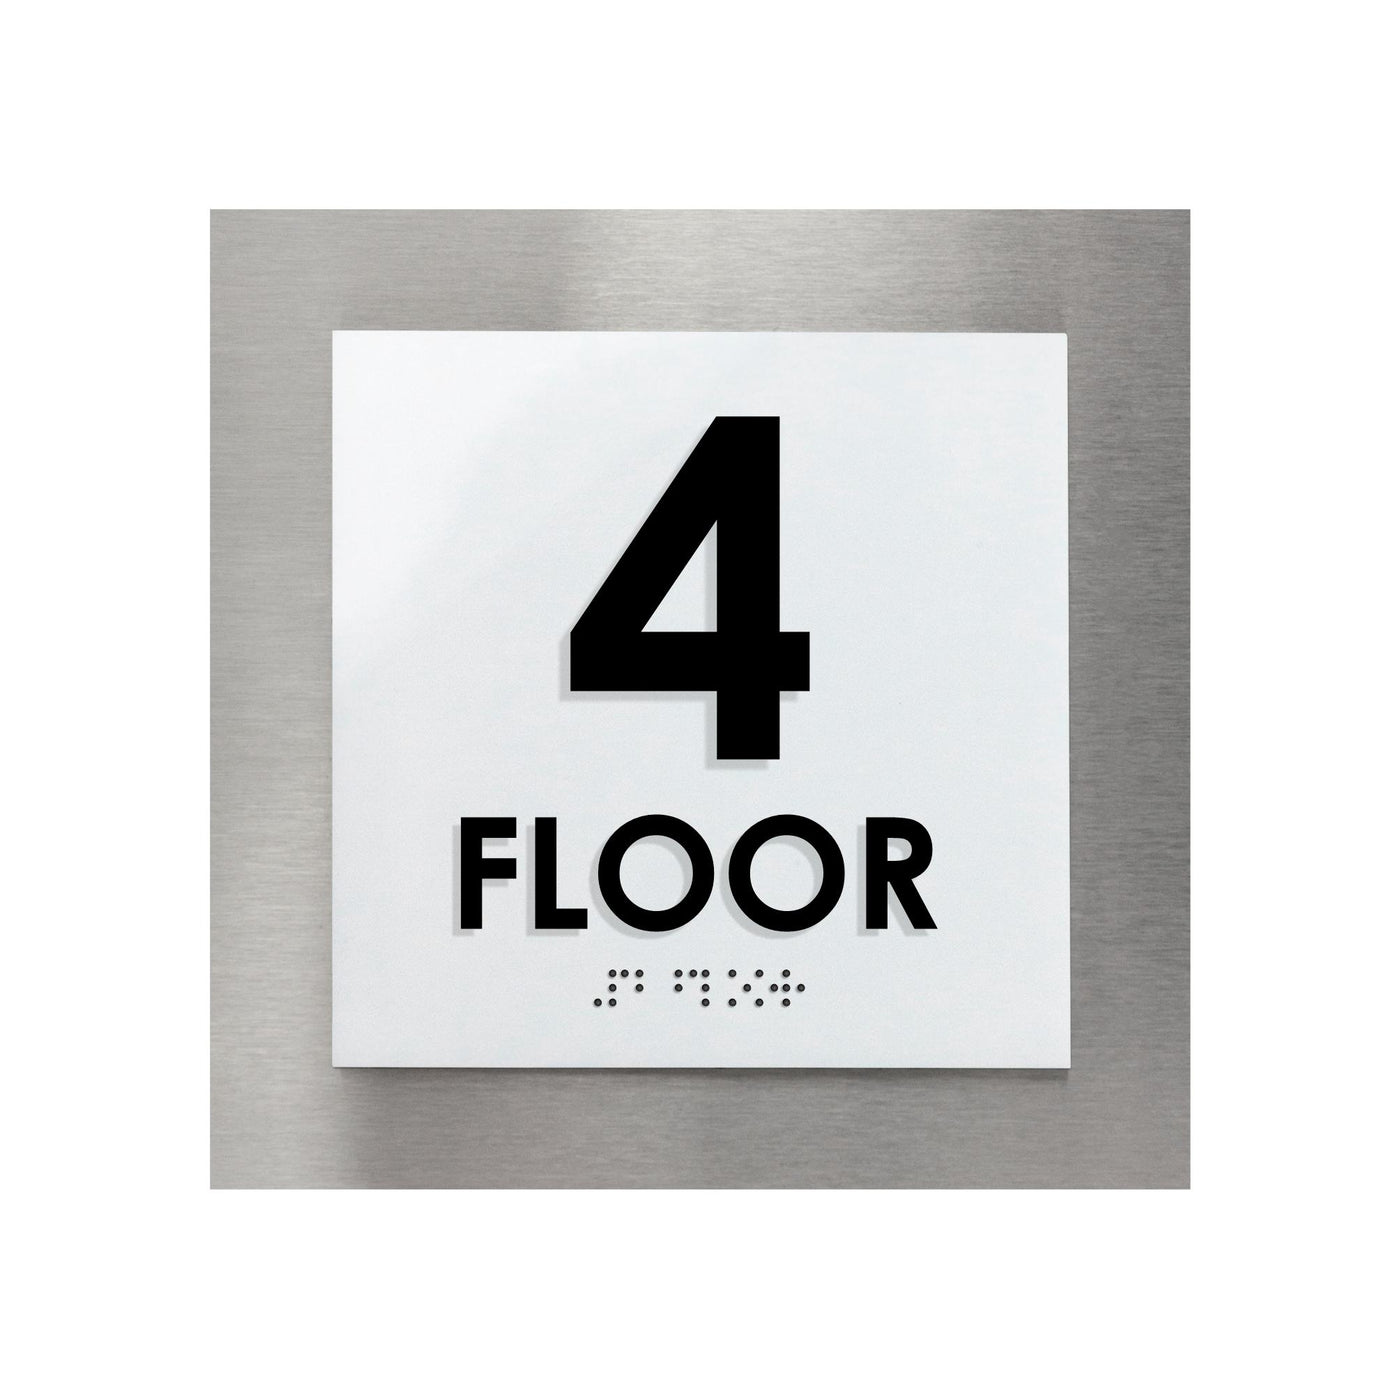 Floor Signs - Sign For 4th Floor - Interior Stainless Steel Sign - "Modern" Design